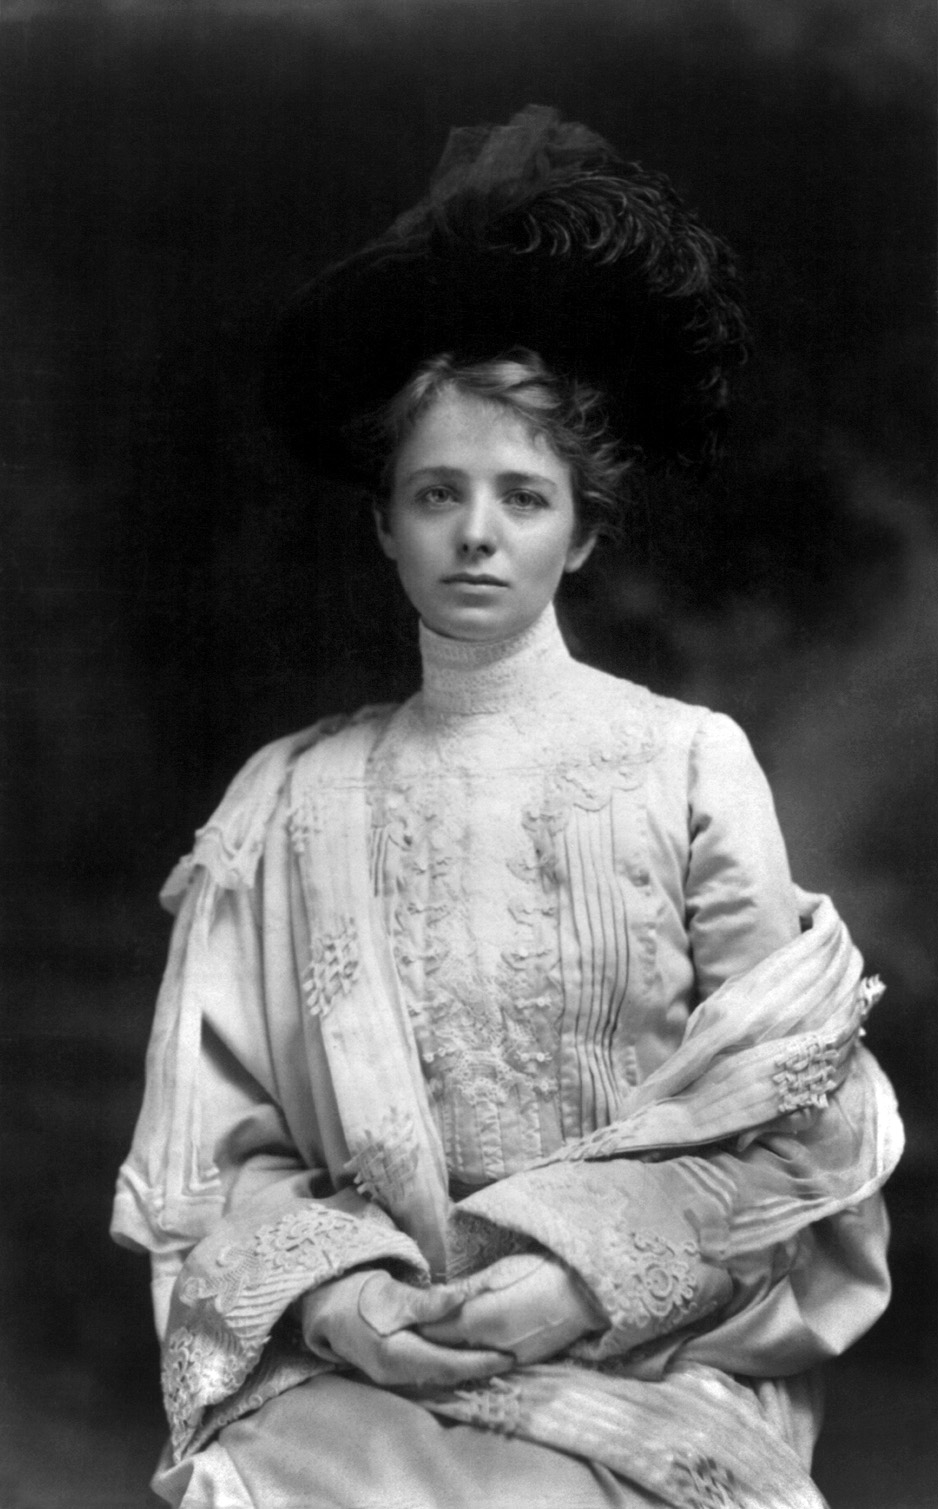 Maude Adams, who died in 1953, was an actress but never got to see the moon landing or Miley Cyrus' VMA performance. Besides that her life was an exceptional one.